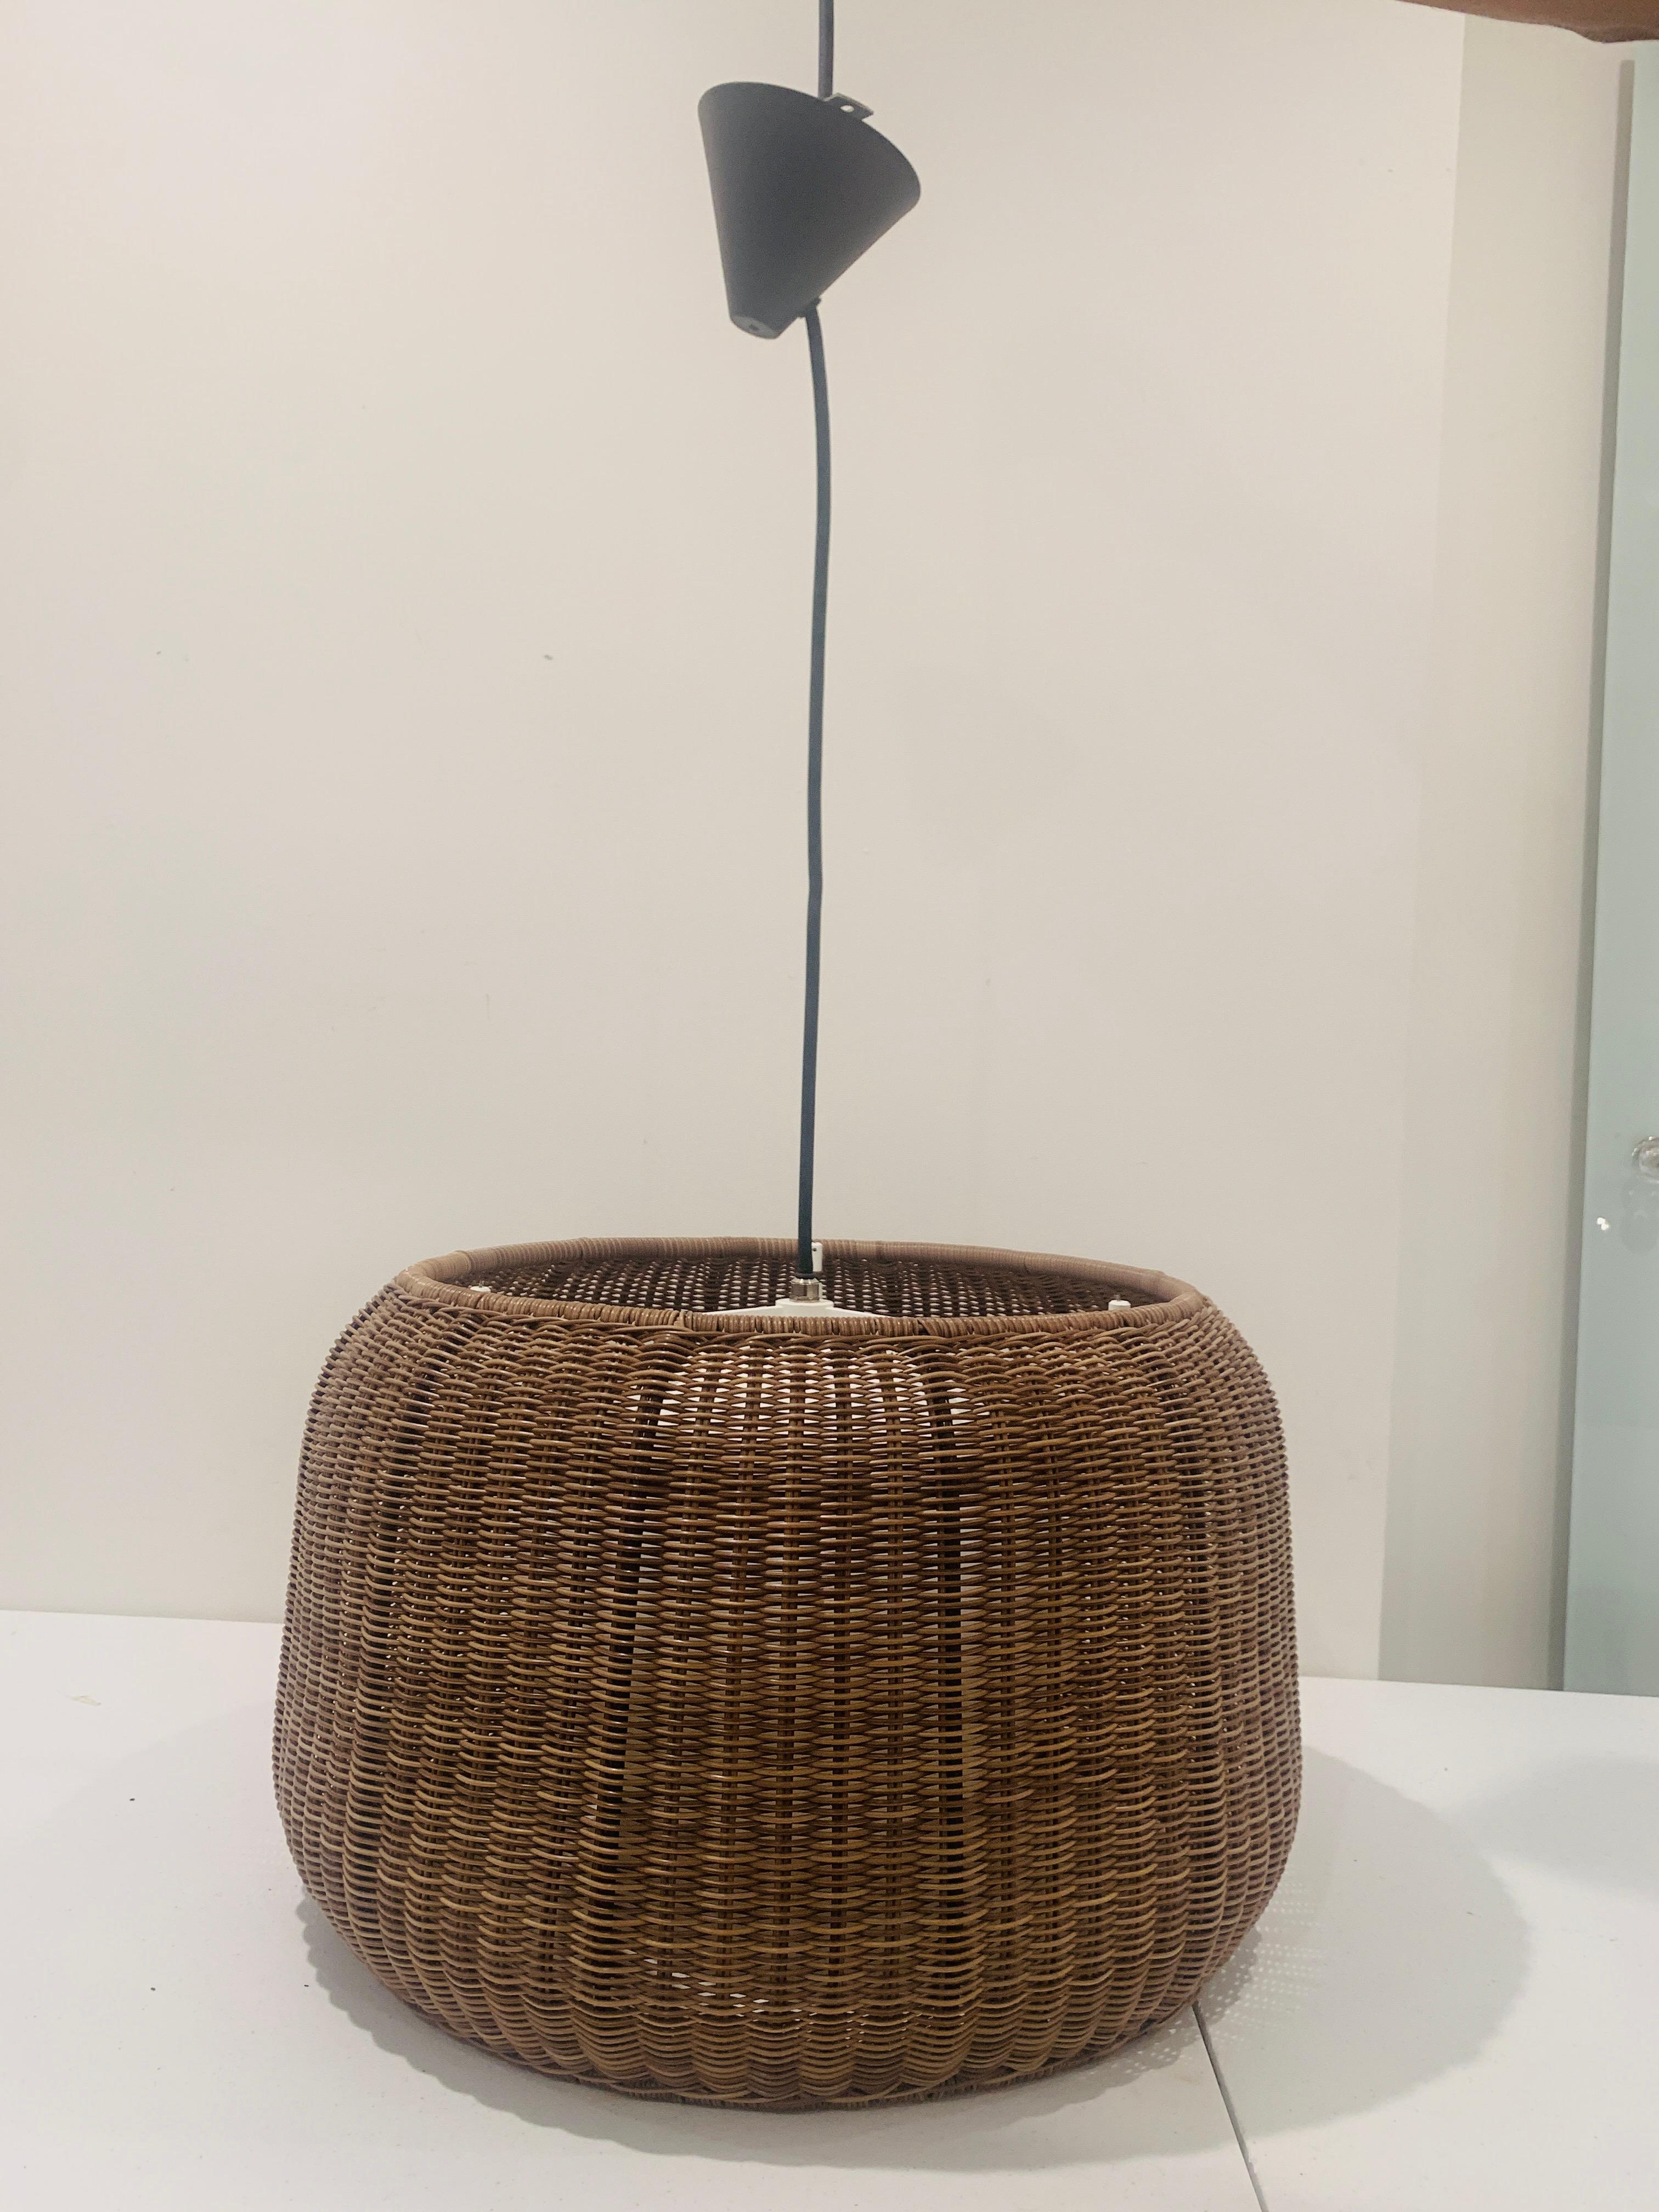 Designed by Alex Fernández Camps.
Designed by Gonzalo Milà.
Manufactured in 2017 by: Bover

Dimensions:
Overall 19.7 inches diameter x 35 inches high
Shade 19.7 in diameter x 11.8 in height
Canopy 4.7 in diameter

FORA is an outdoors lamp